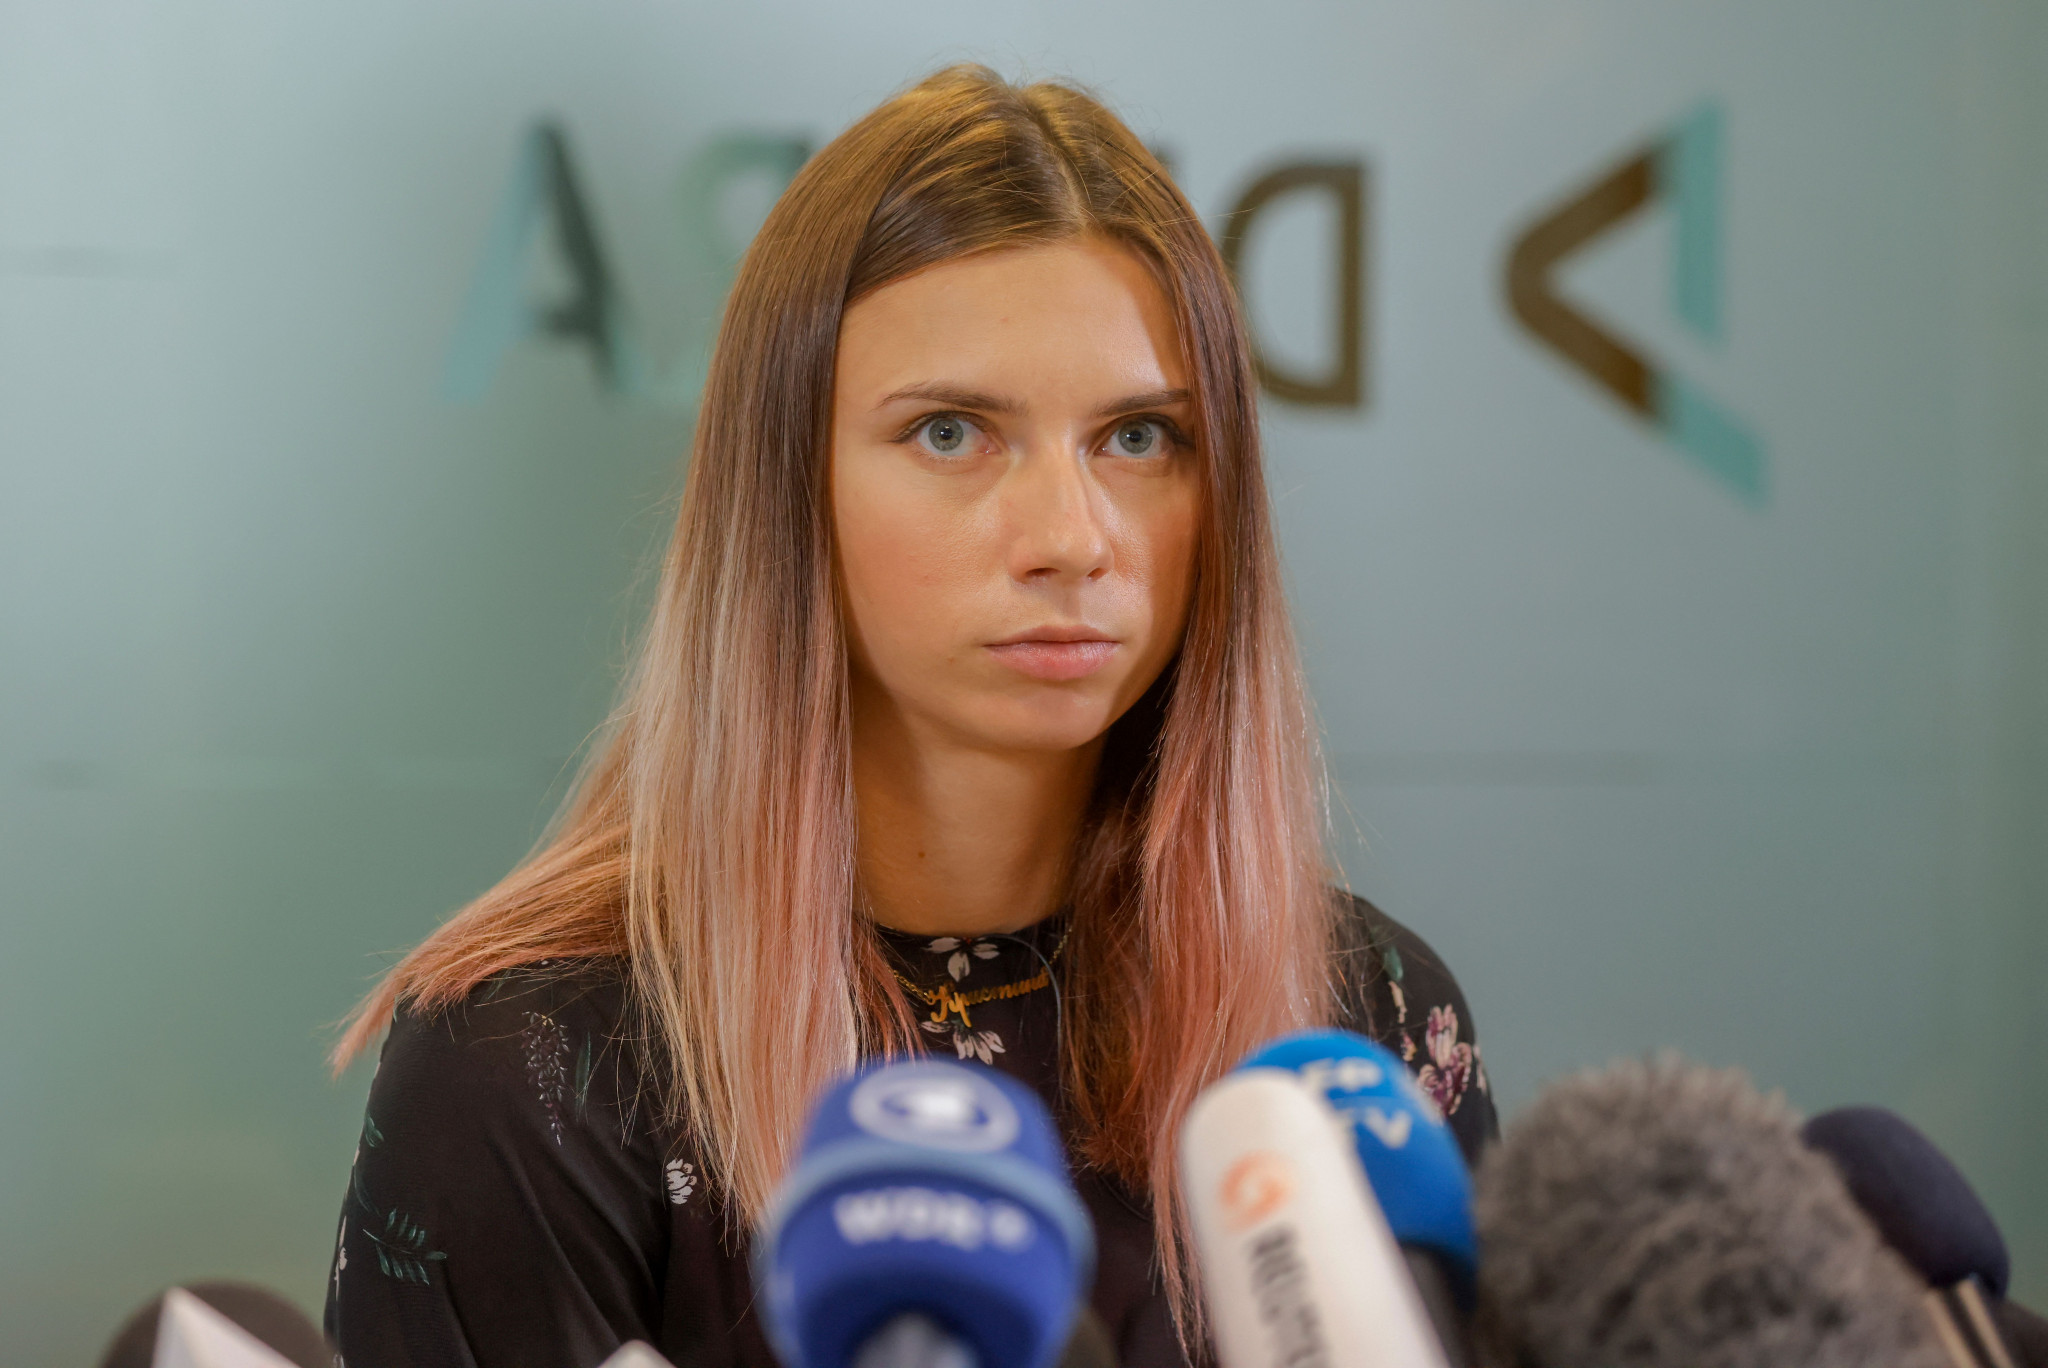 Belarusian-born sprinter Krystsina Tsimanouskaya defected to Poland after alleging she was taken to the airport against her will at Tokyo 2020 ©Getty Images